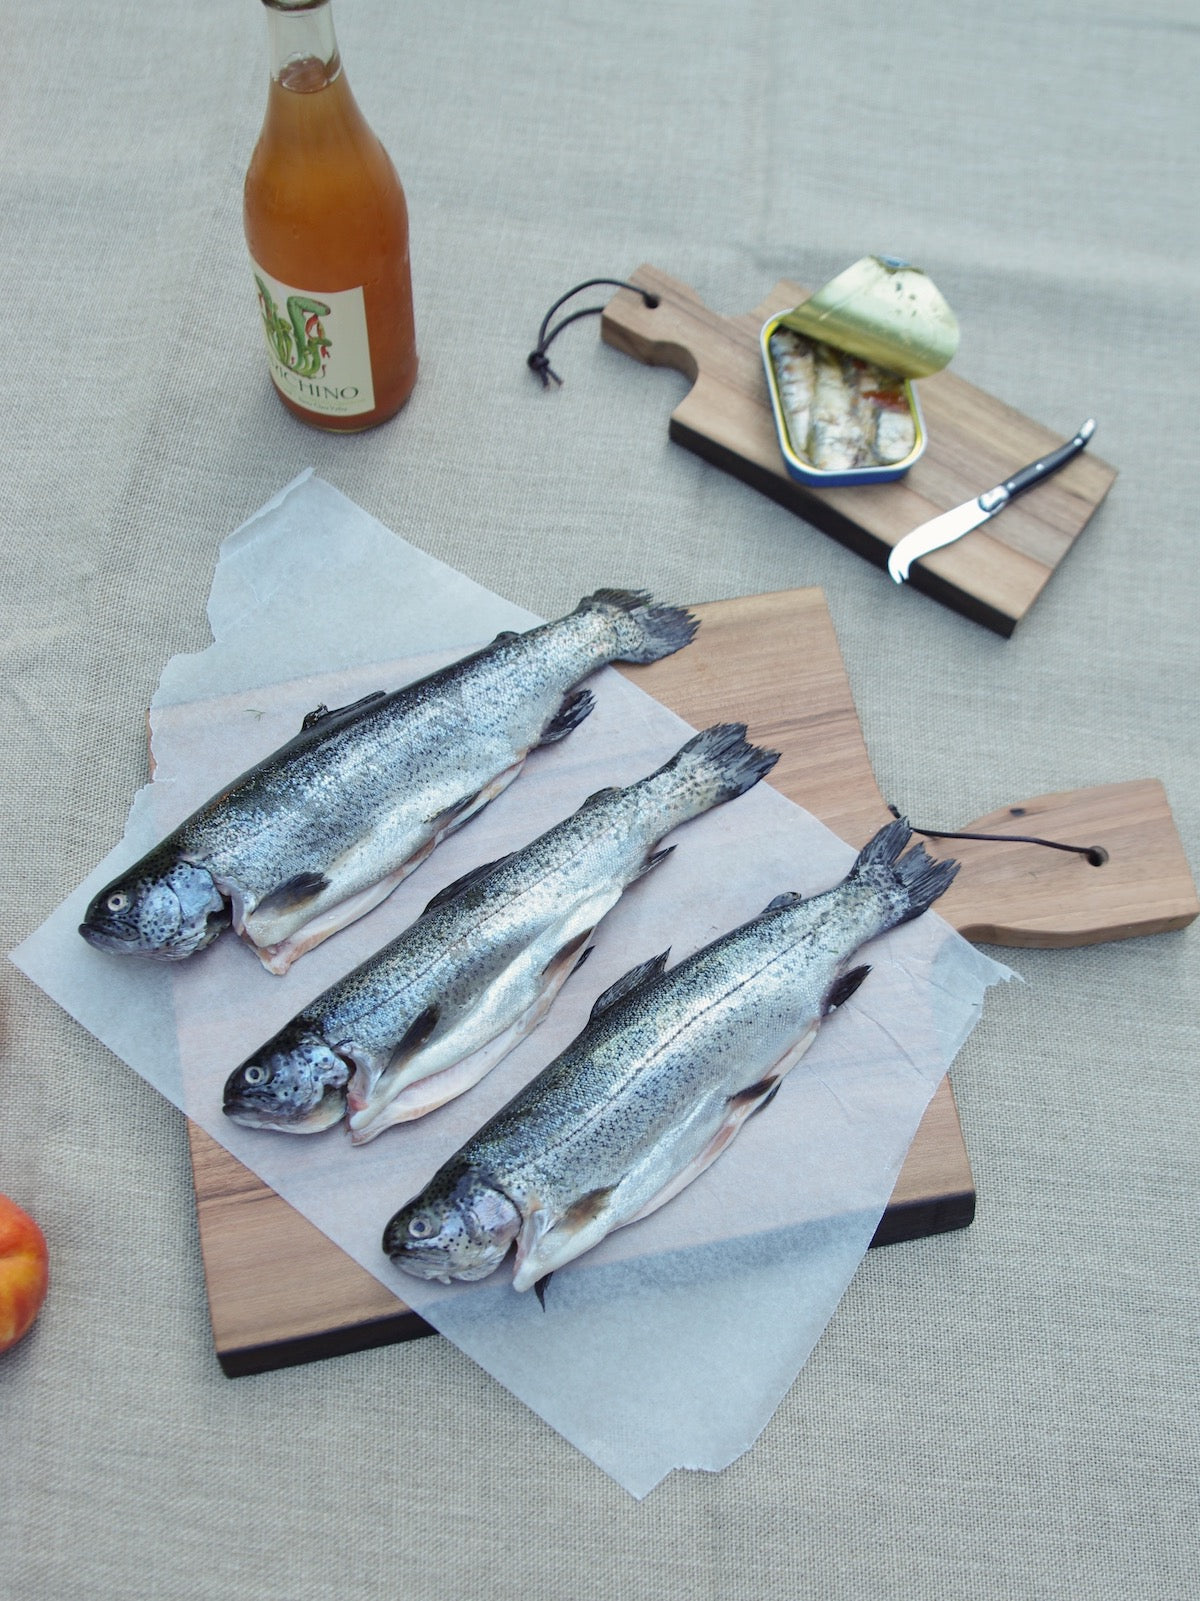 Fish on wooden cutting board. Sardines on smaller wooden cutting board.